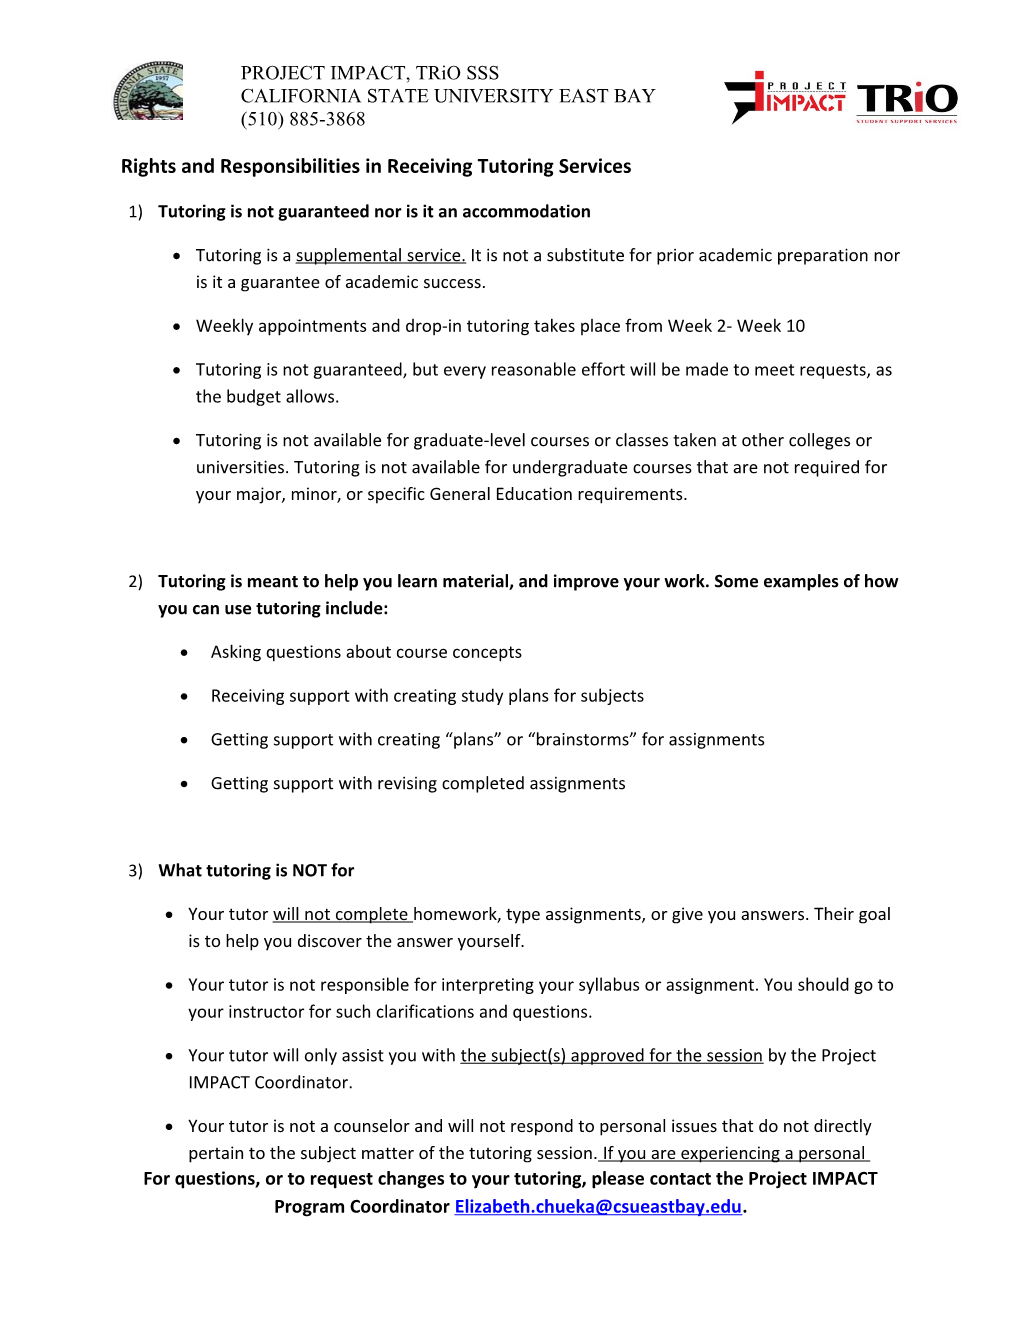 Rights and Responsibilities in Receiving Tutoring Services